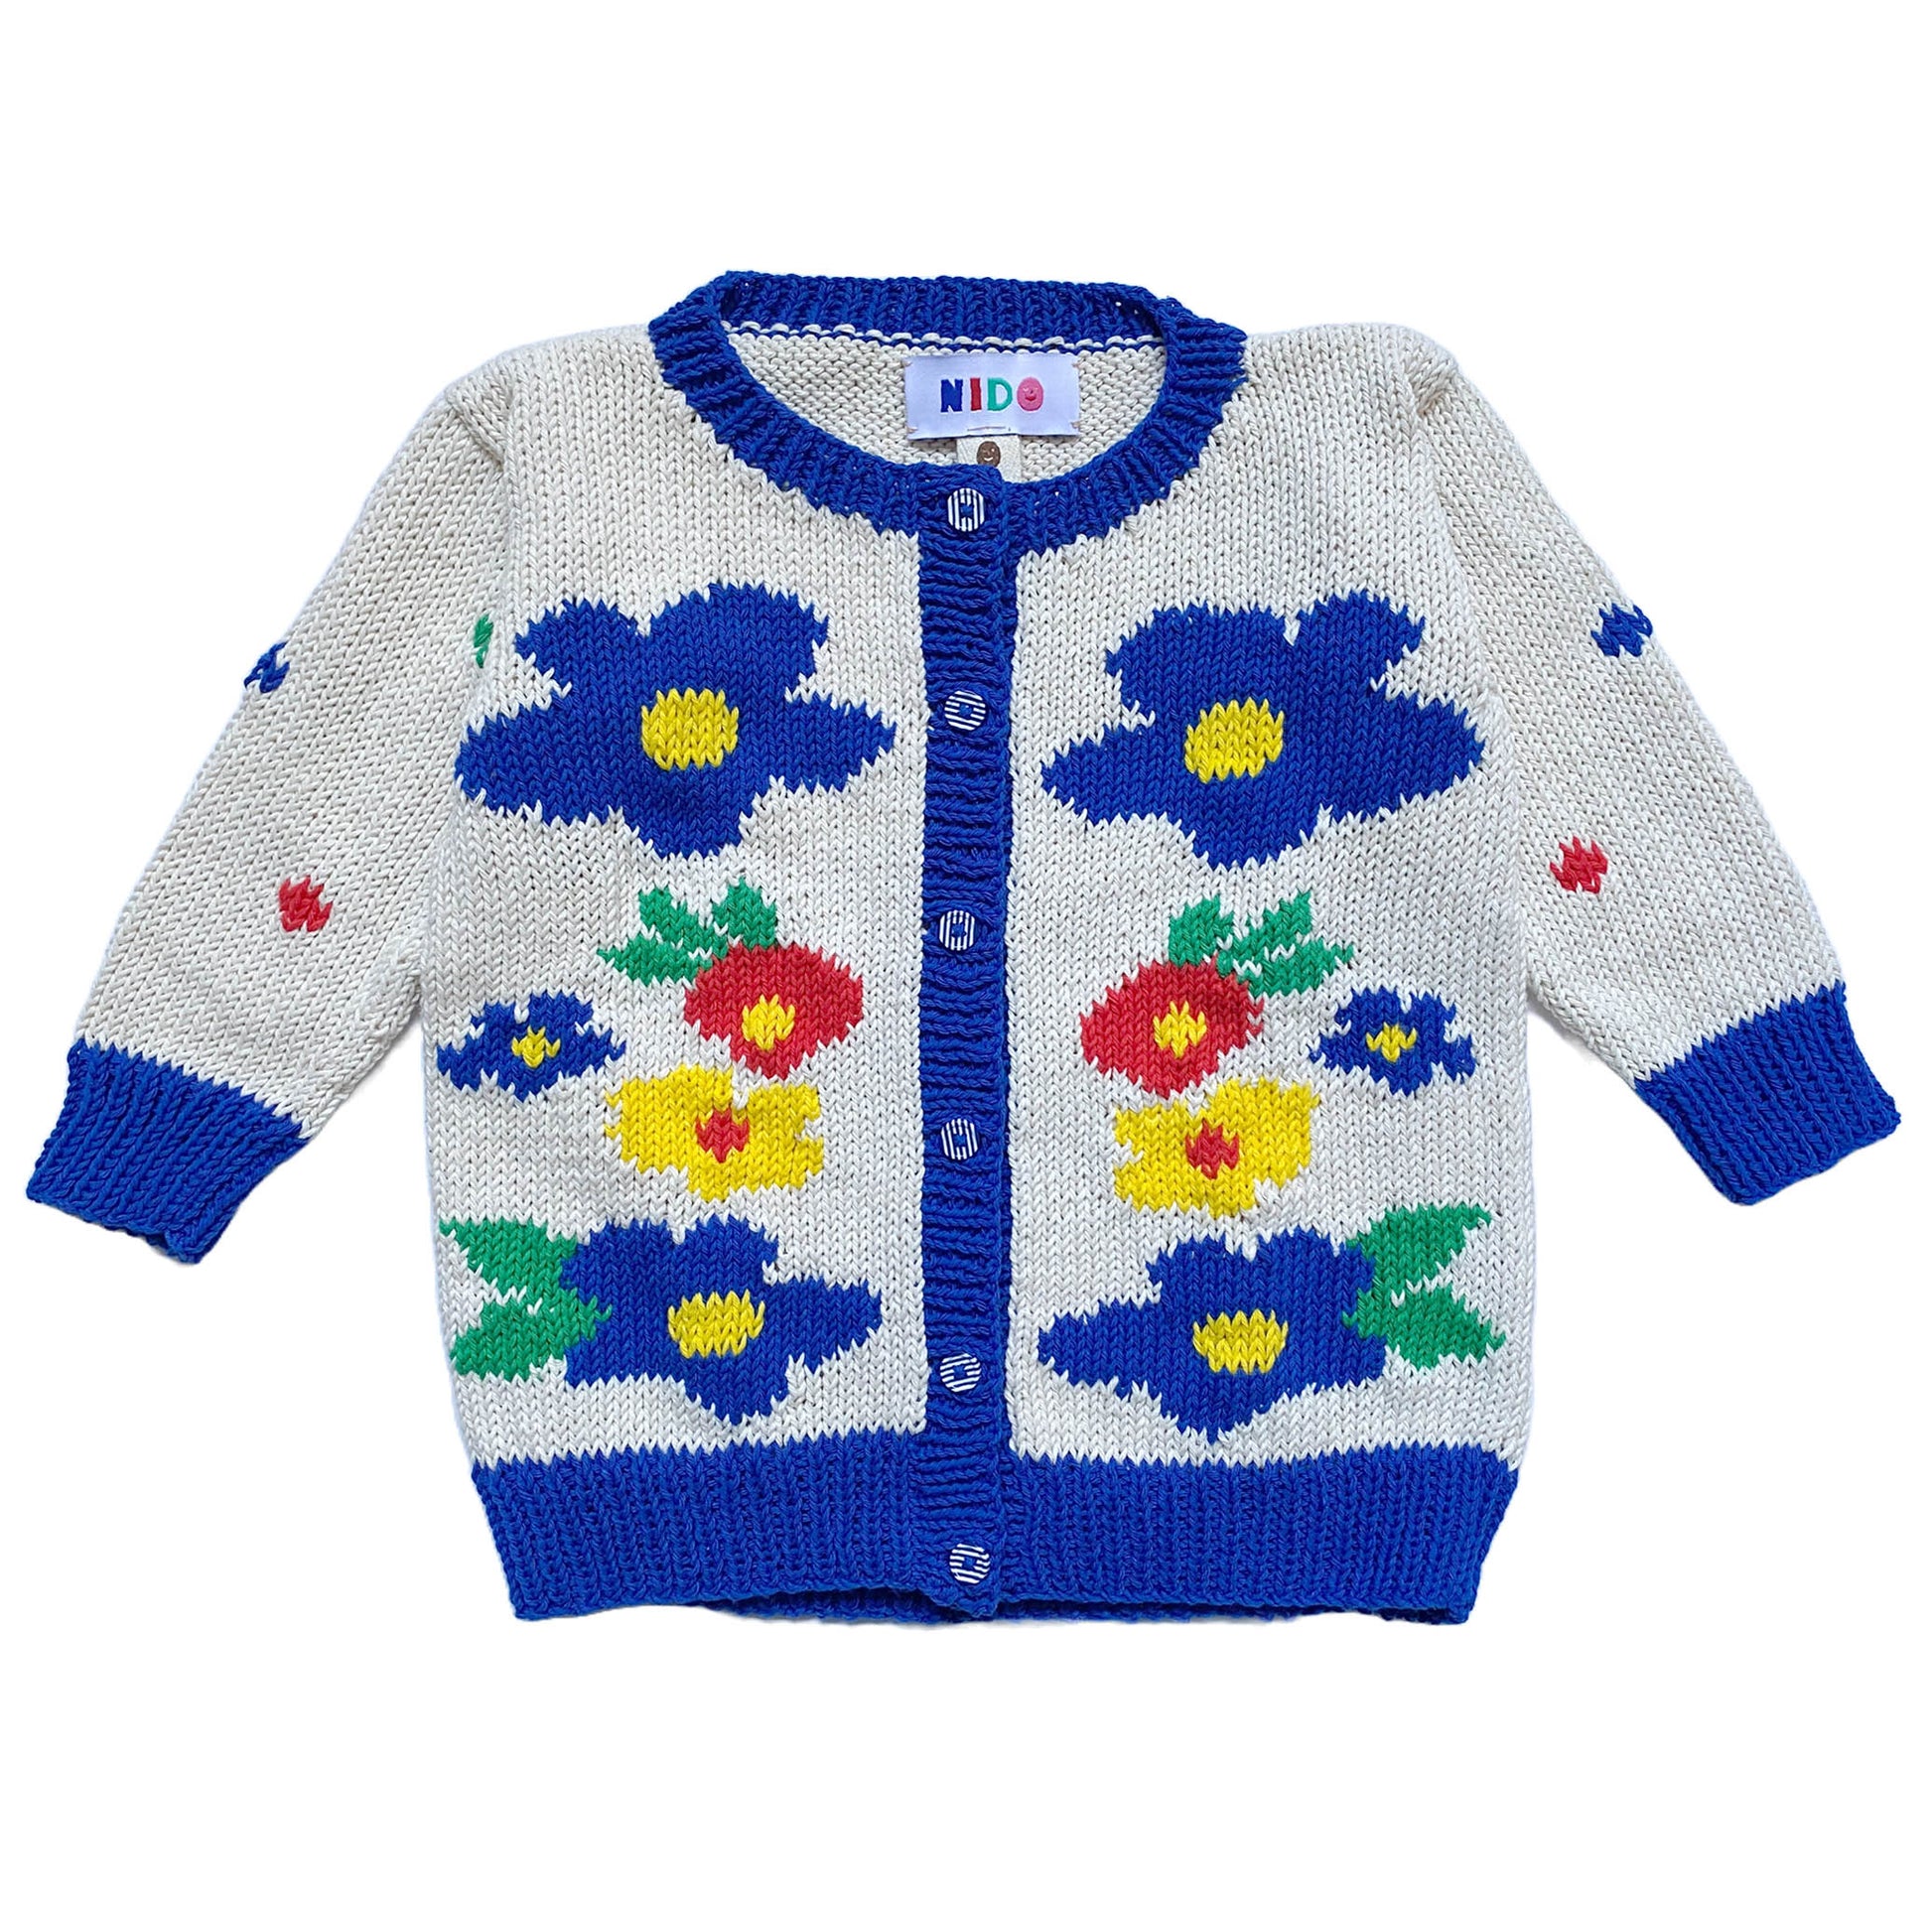 bloom cardigan is a hand knitted for kids 